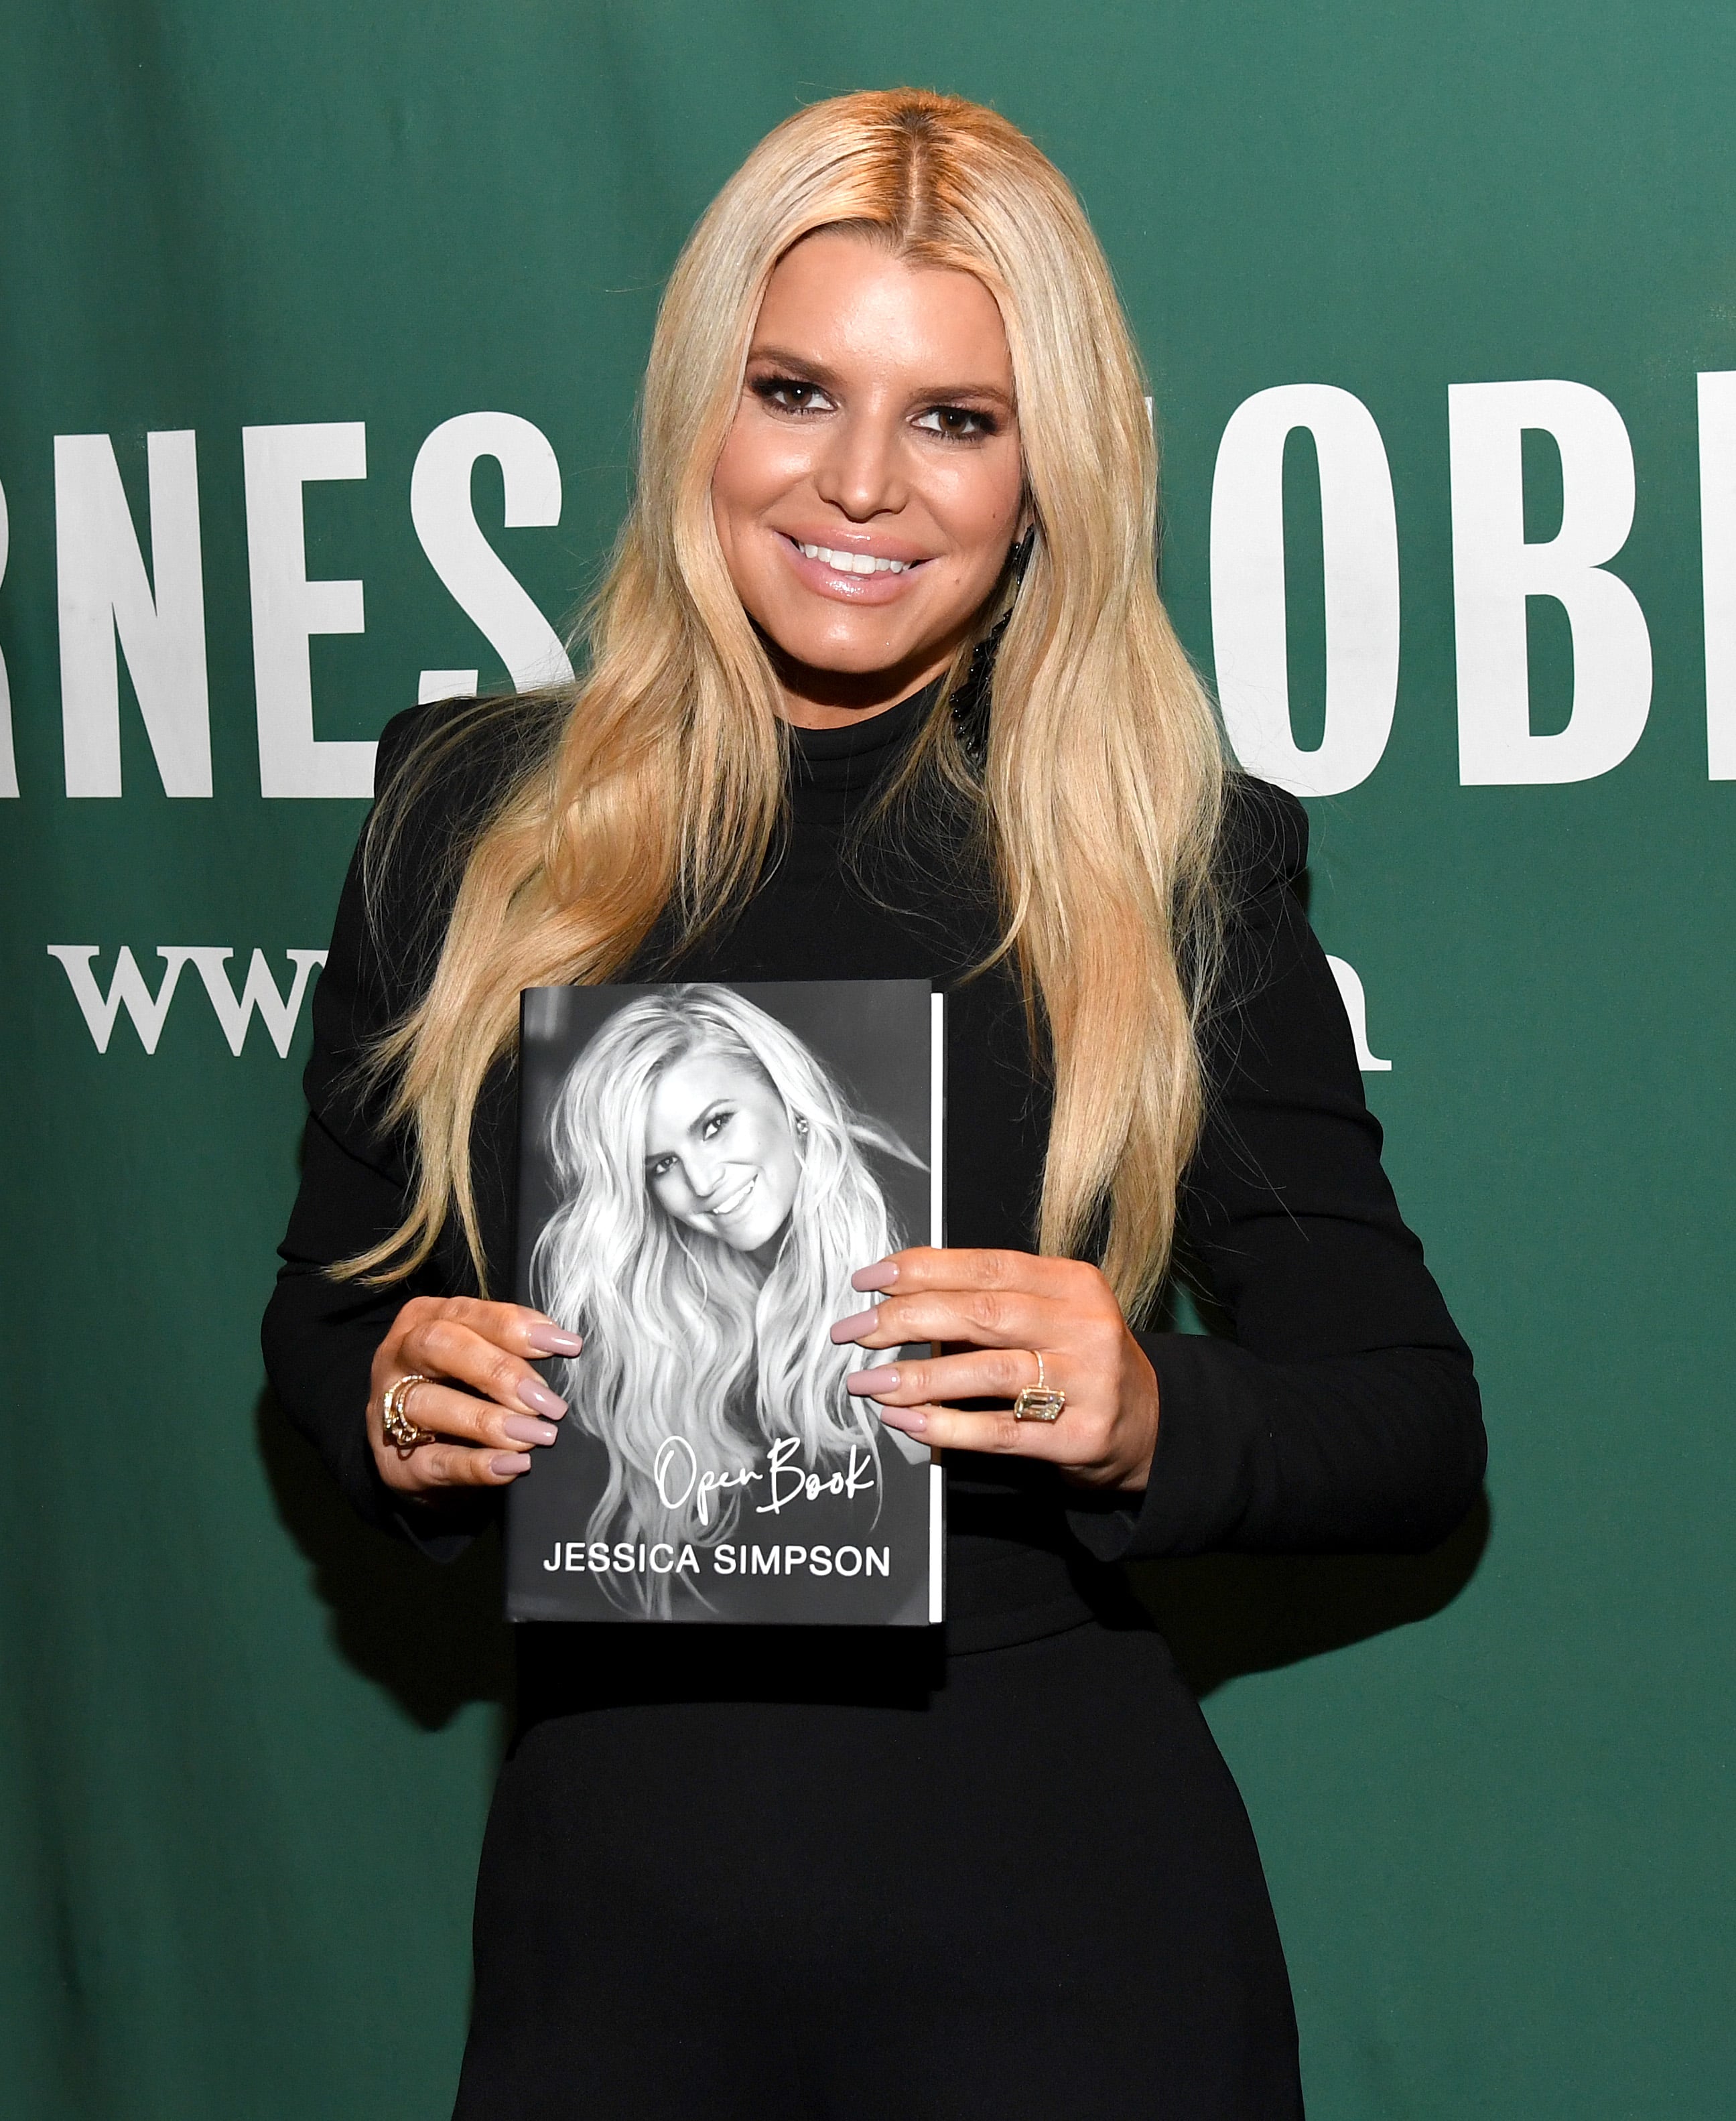 Jessica Simpson music, videos, stats, and photos